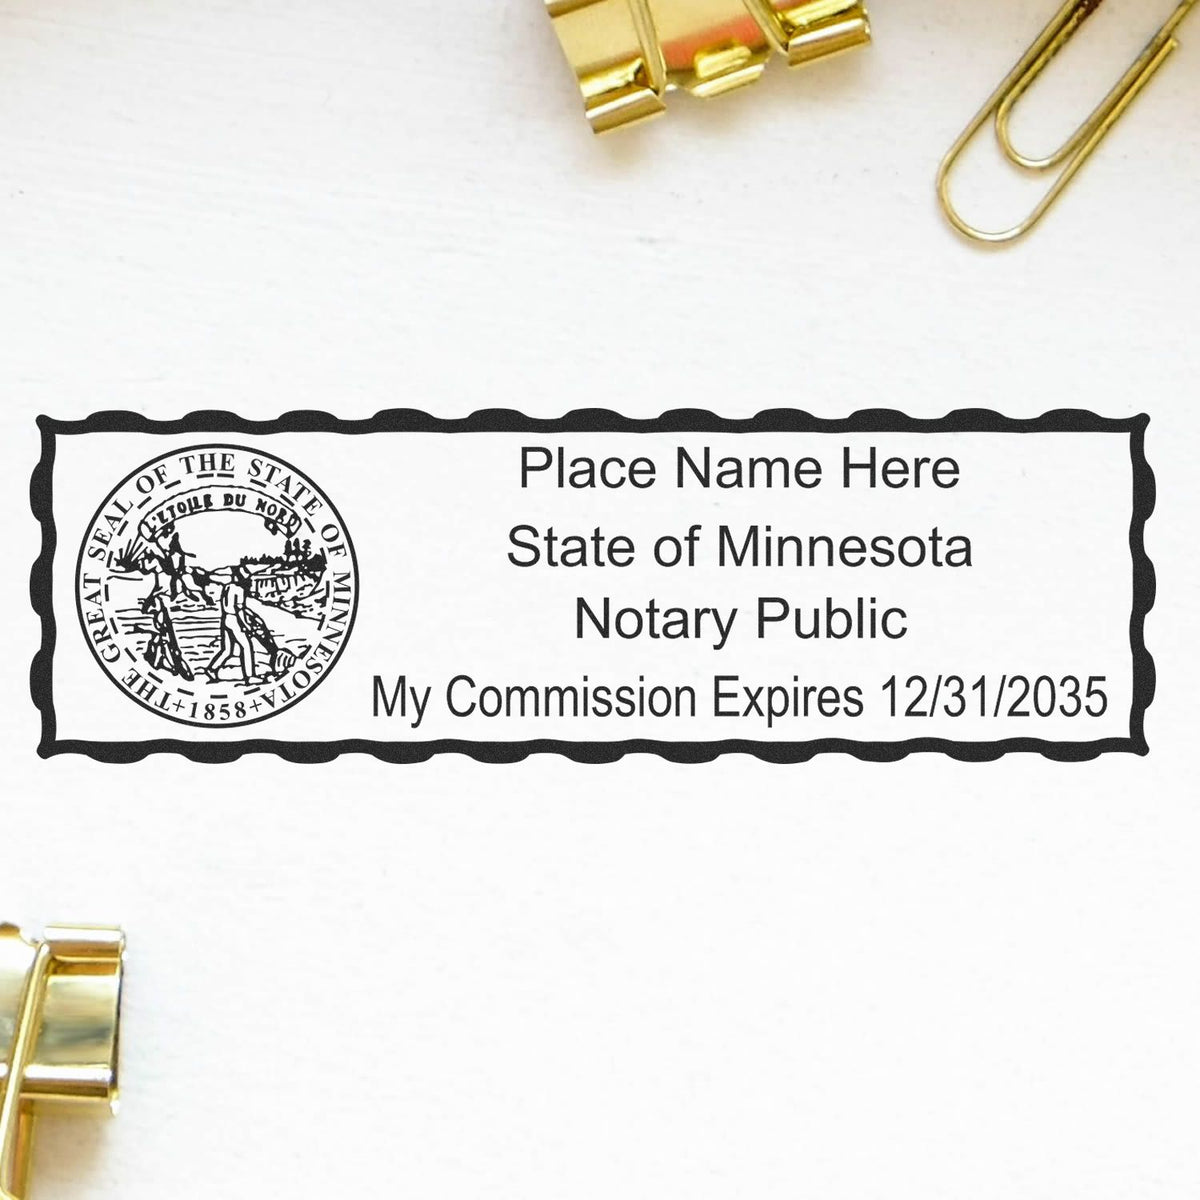 An alternative view of the PSI Minnesota Notary Stamp stamped on a sheet of paper showing the image in use